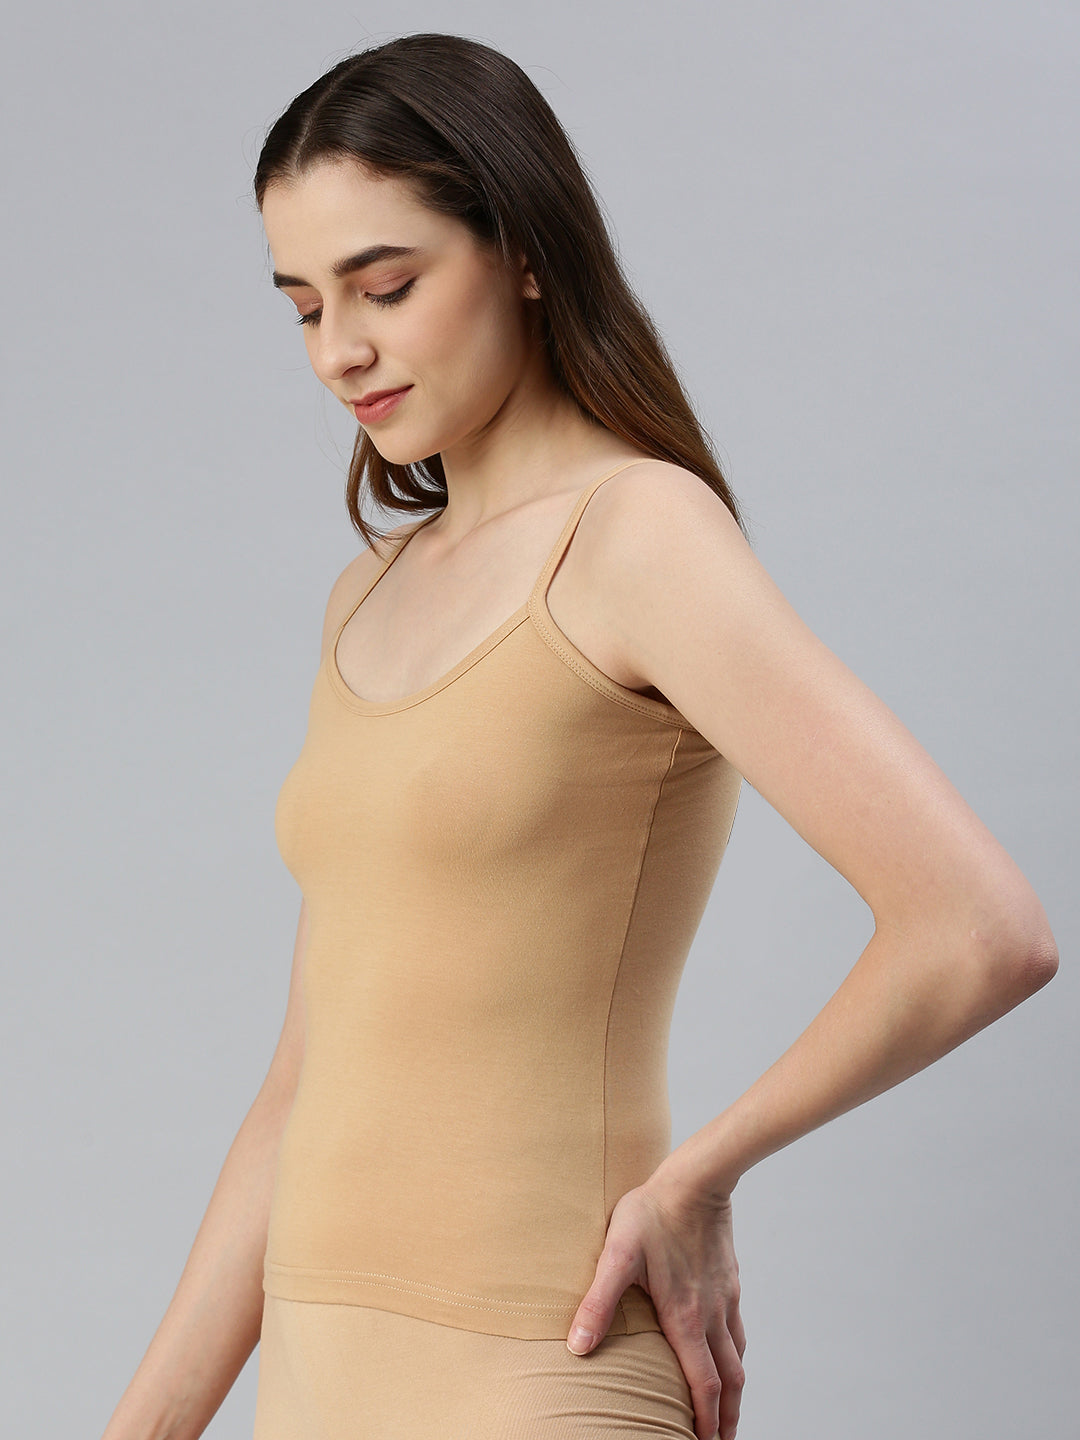 Shop Prisma's Deep Skin Basic Camisole for Everyday Wear